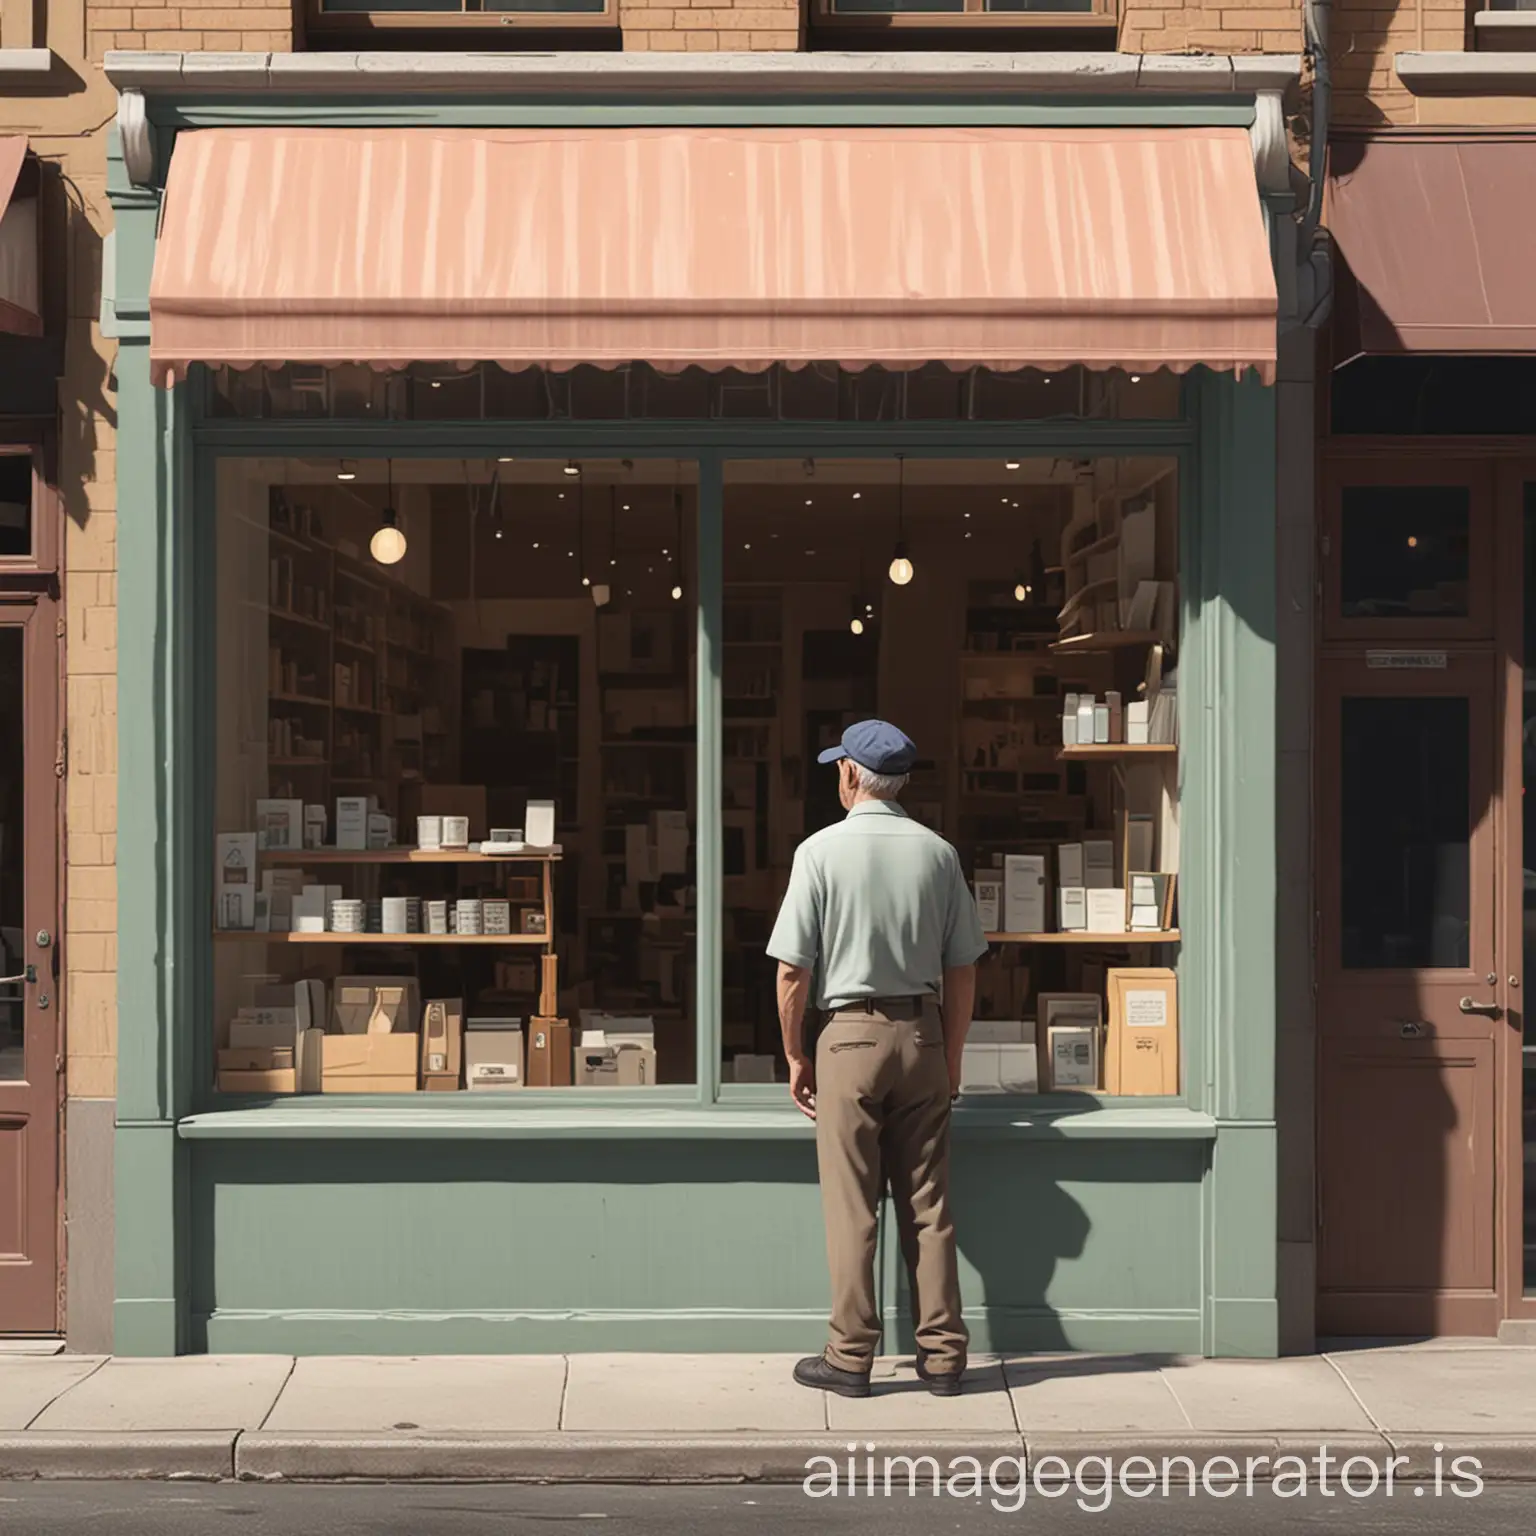 Wide shot of the shopkeeper looking out the window outside his store, on the sidewalk. The shopkeeper is slightly older, with thinning hair, wearing a cap, and of short stature. Minimalist vectorized animation-style drawing, in color and 3D.